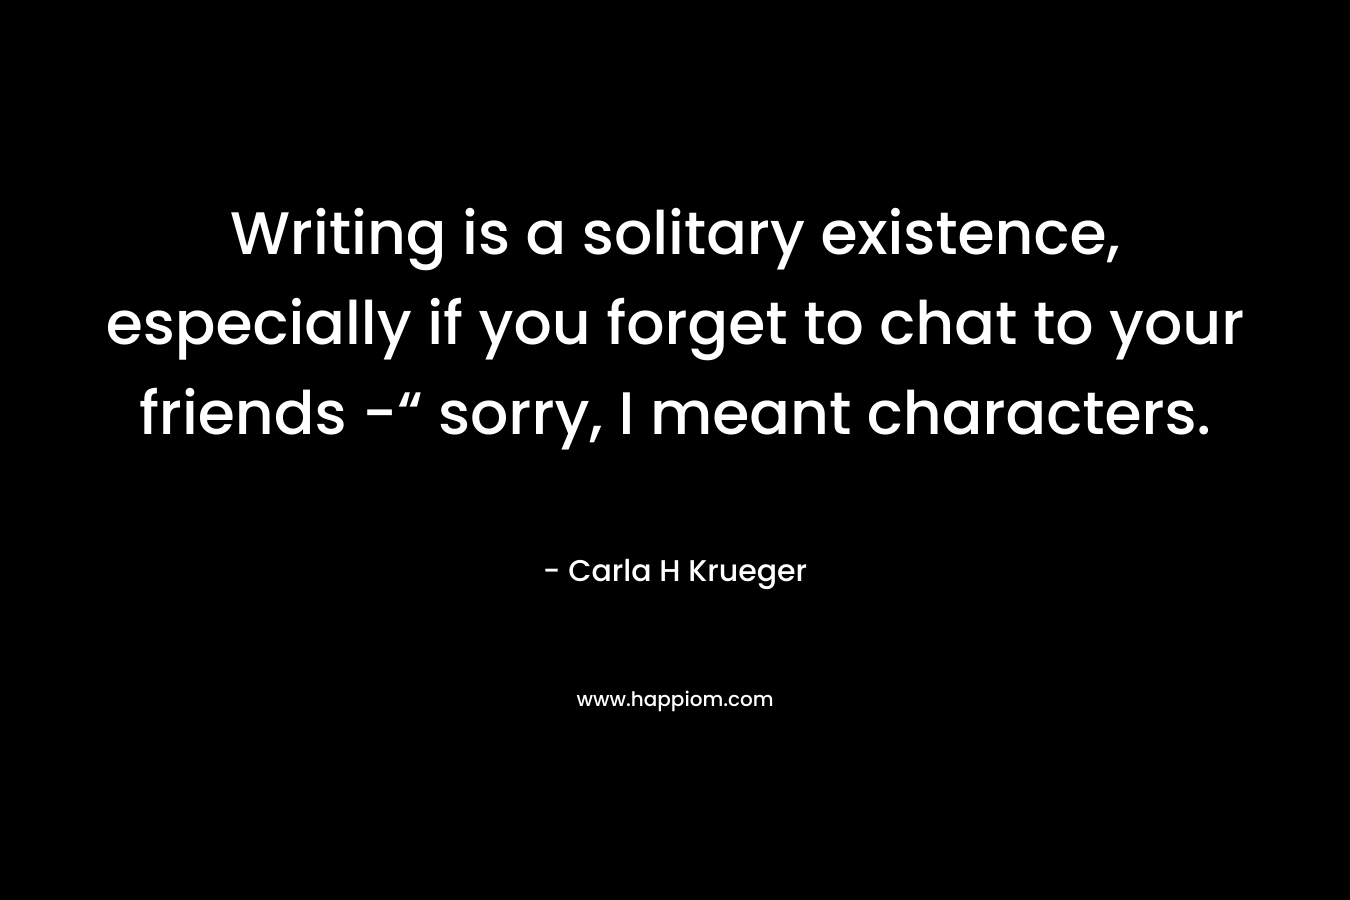 Writing is a solitary existence, especially if you forget to chat to your friends -“ sorry, I meant characters.